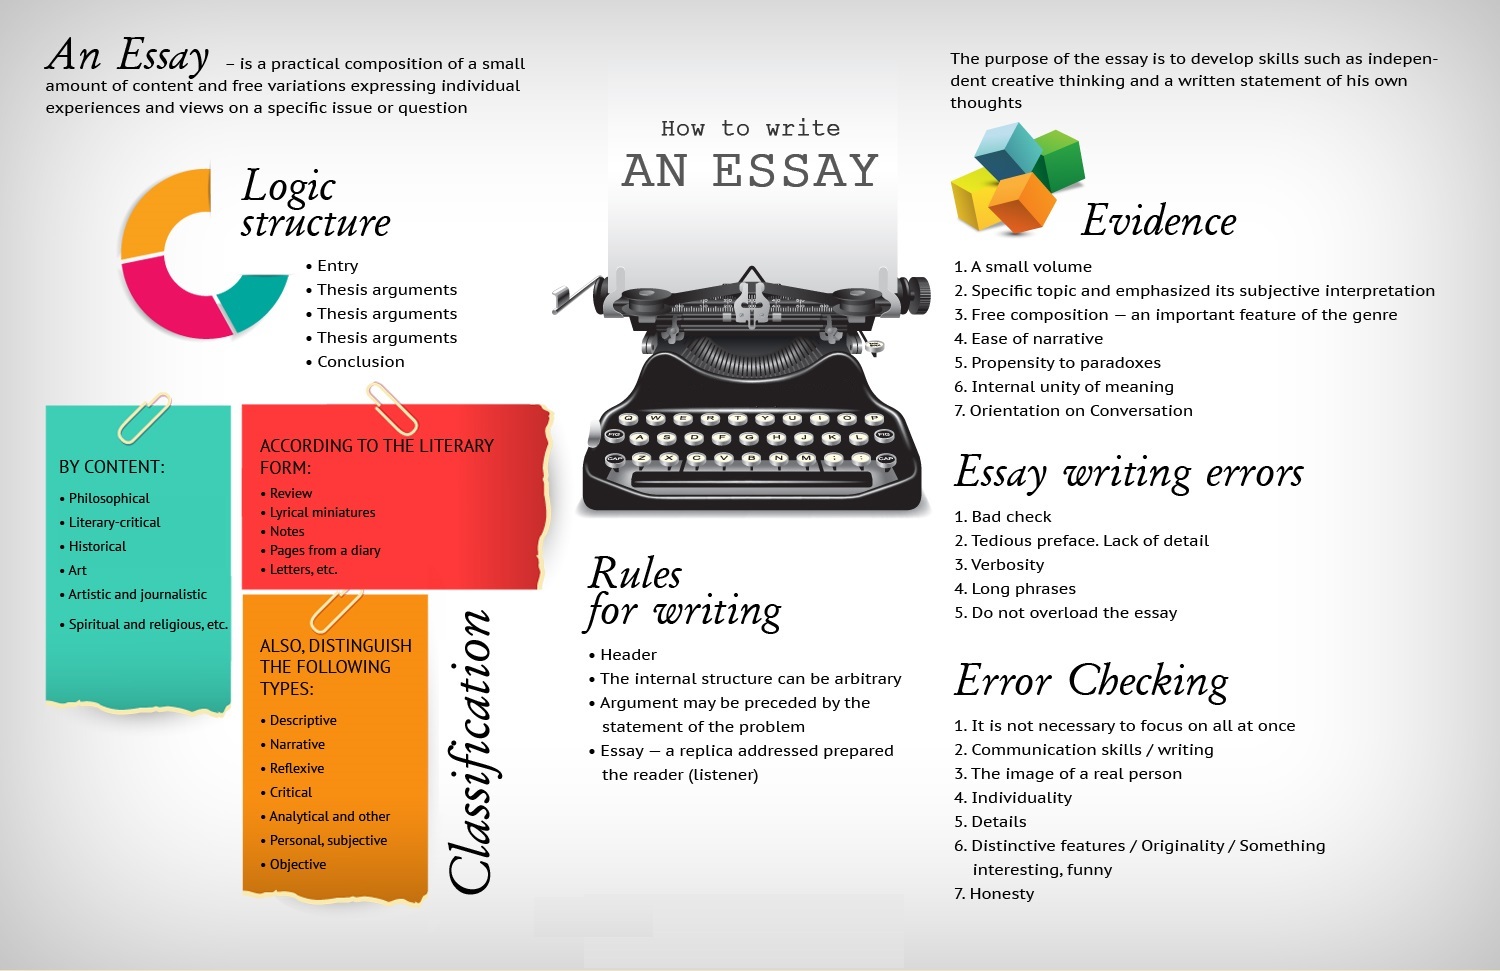 Best essay writing services in uk